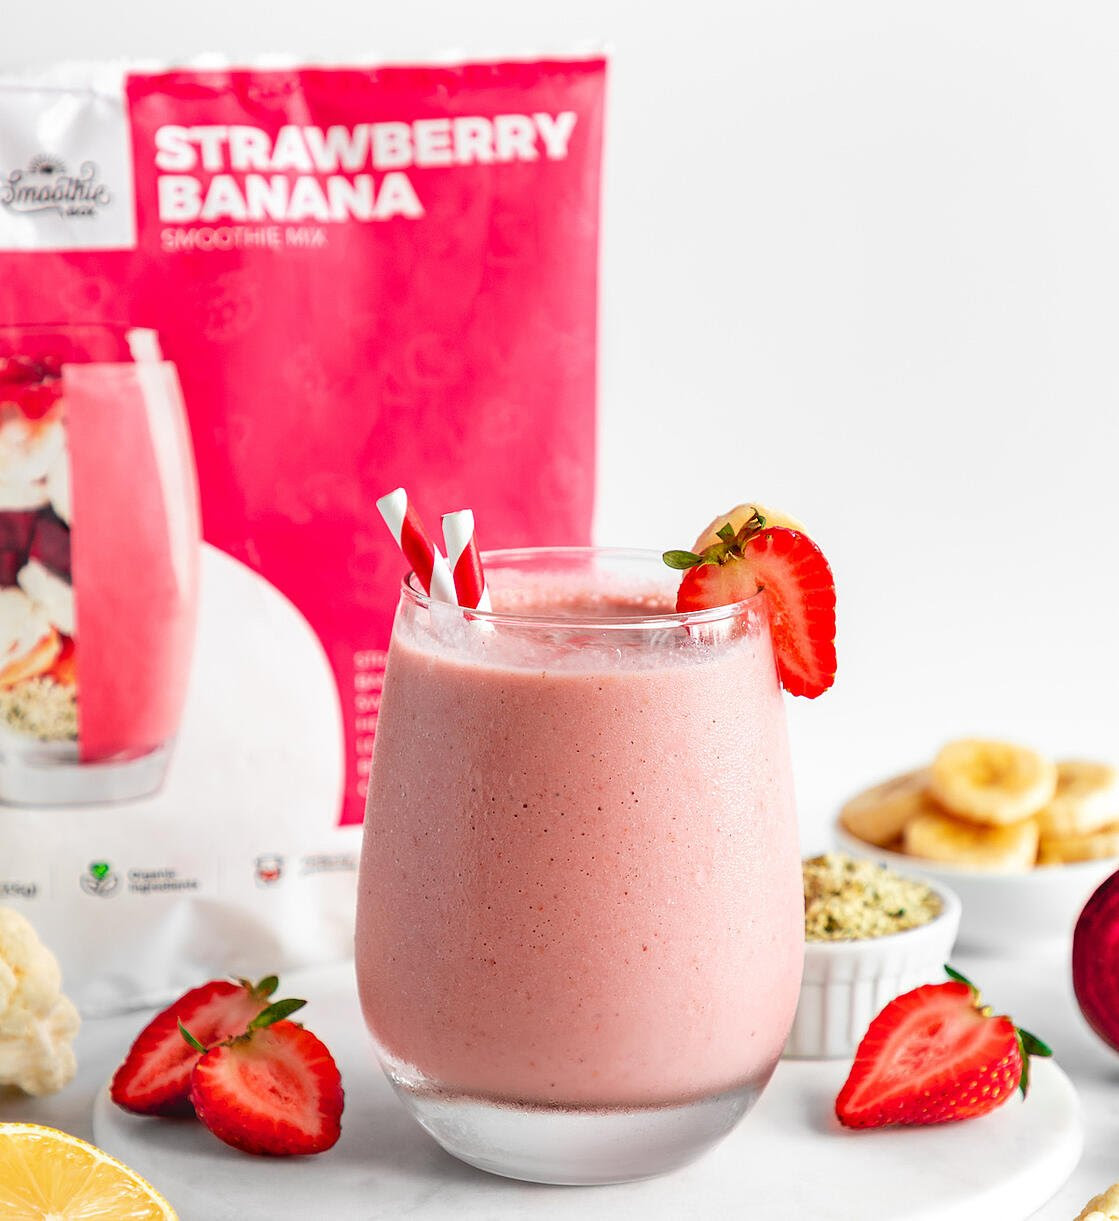 SmoothieBox Launches New Smoothie Flavor: Strawberry Banana! - Hello  Subscription